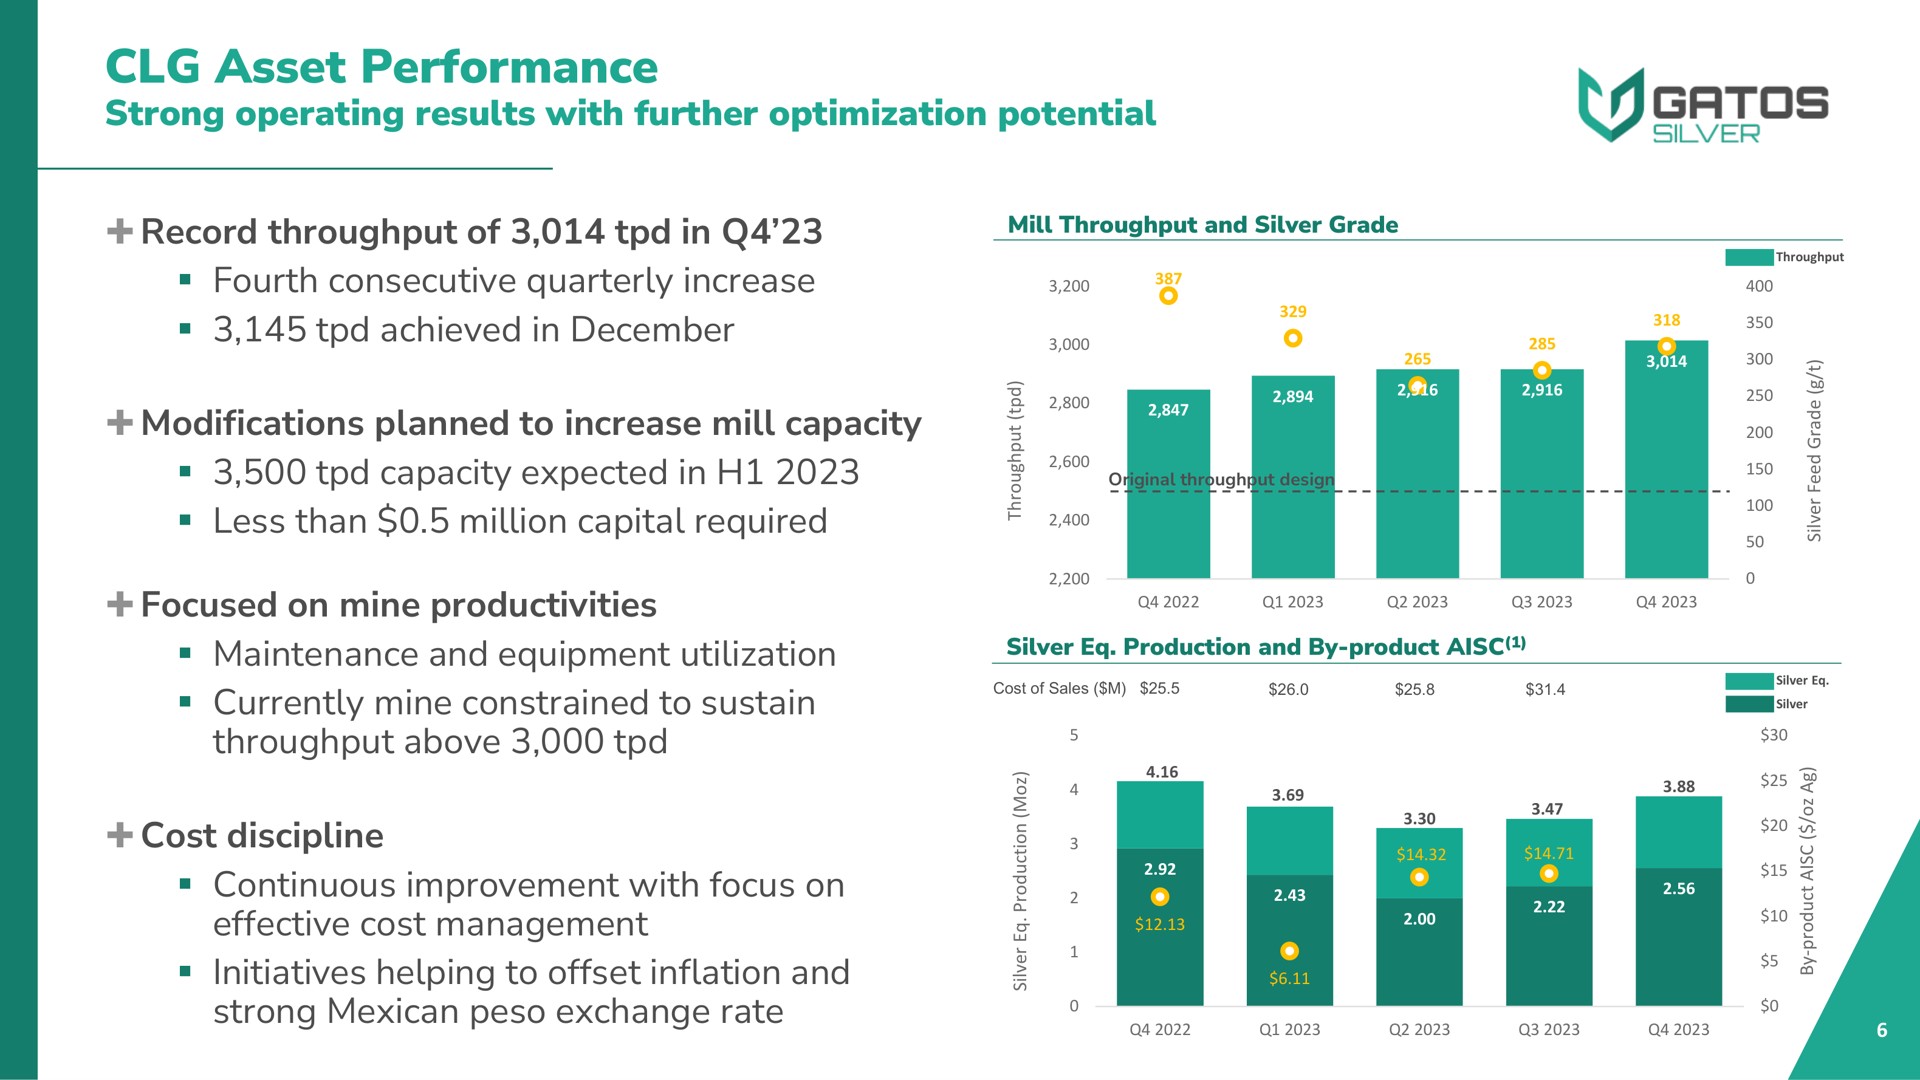 asset performance strong operating results with further optimization potential record throughput of in fourth consecutive quarterly increase achieved in modifications planned to increase mill capacity capacity expected in less than million capital required focused on mine productivities maintenance and equipment utilization currently mine constrained to sustain throughput above cost discipline continuous improvement with focus on effective cost management initiatives helping to offset inflation and strong peso exchange rate mall silver grade am amma silver reduction by | Gatos Silver